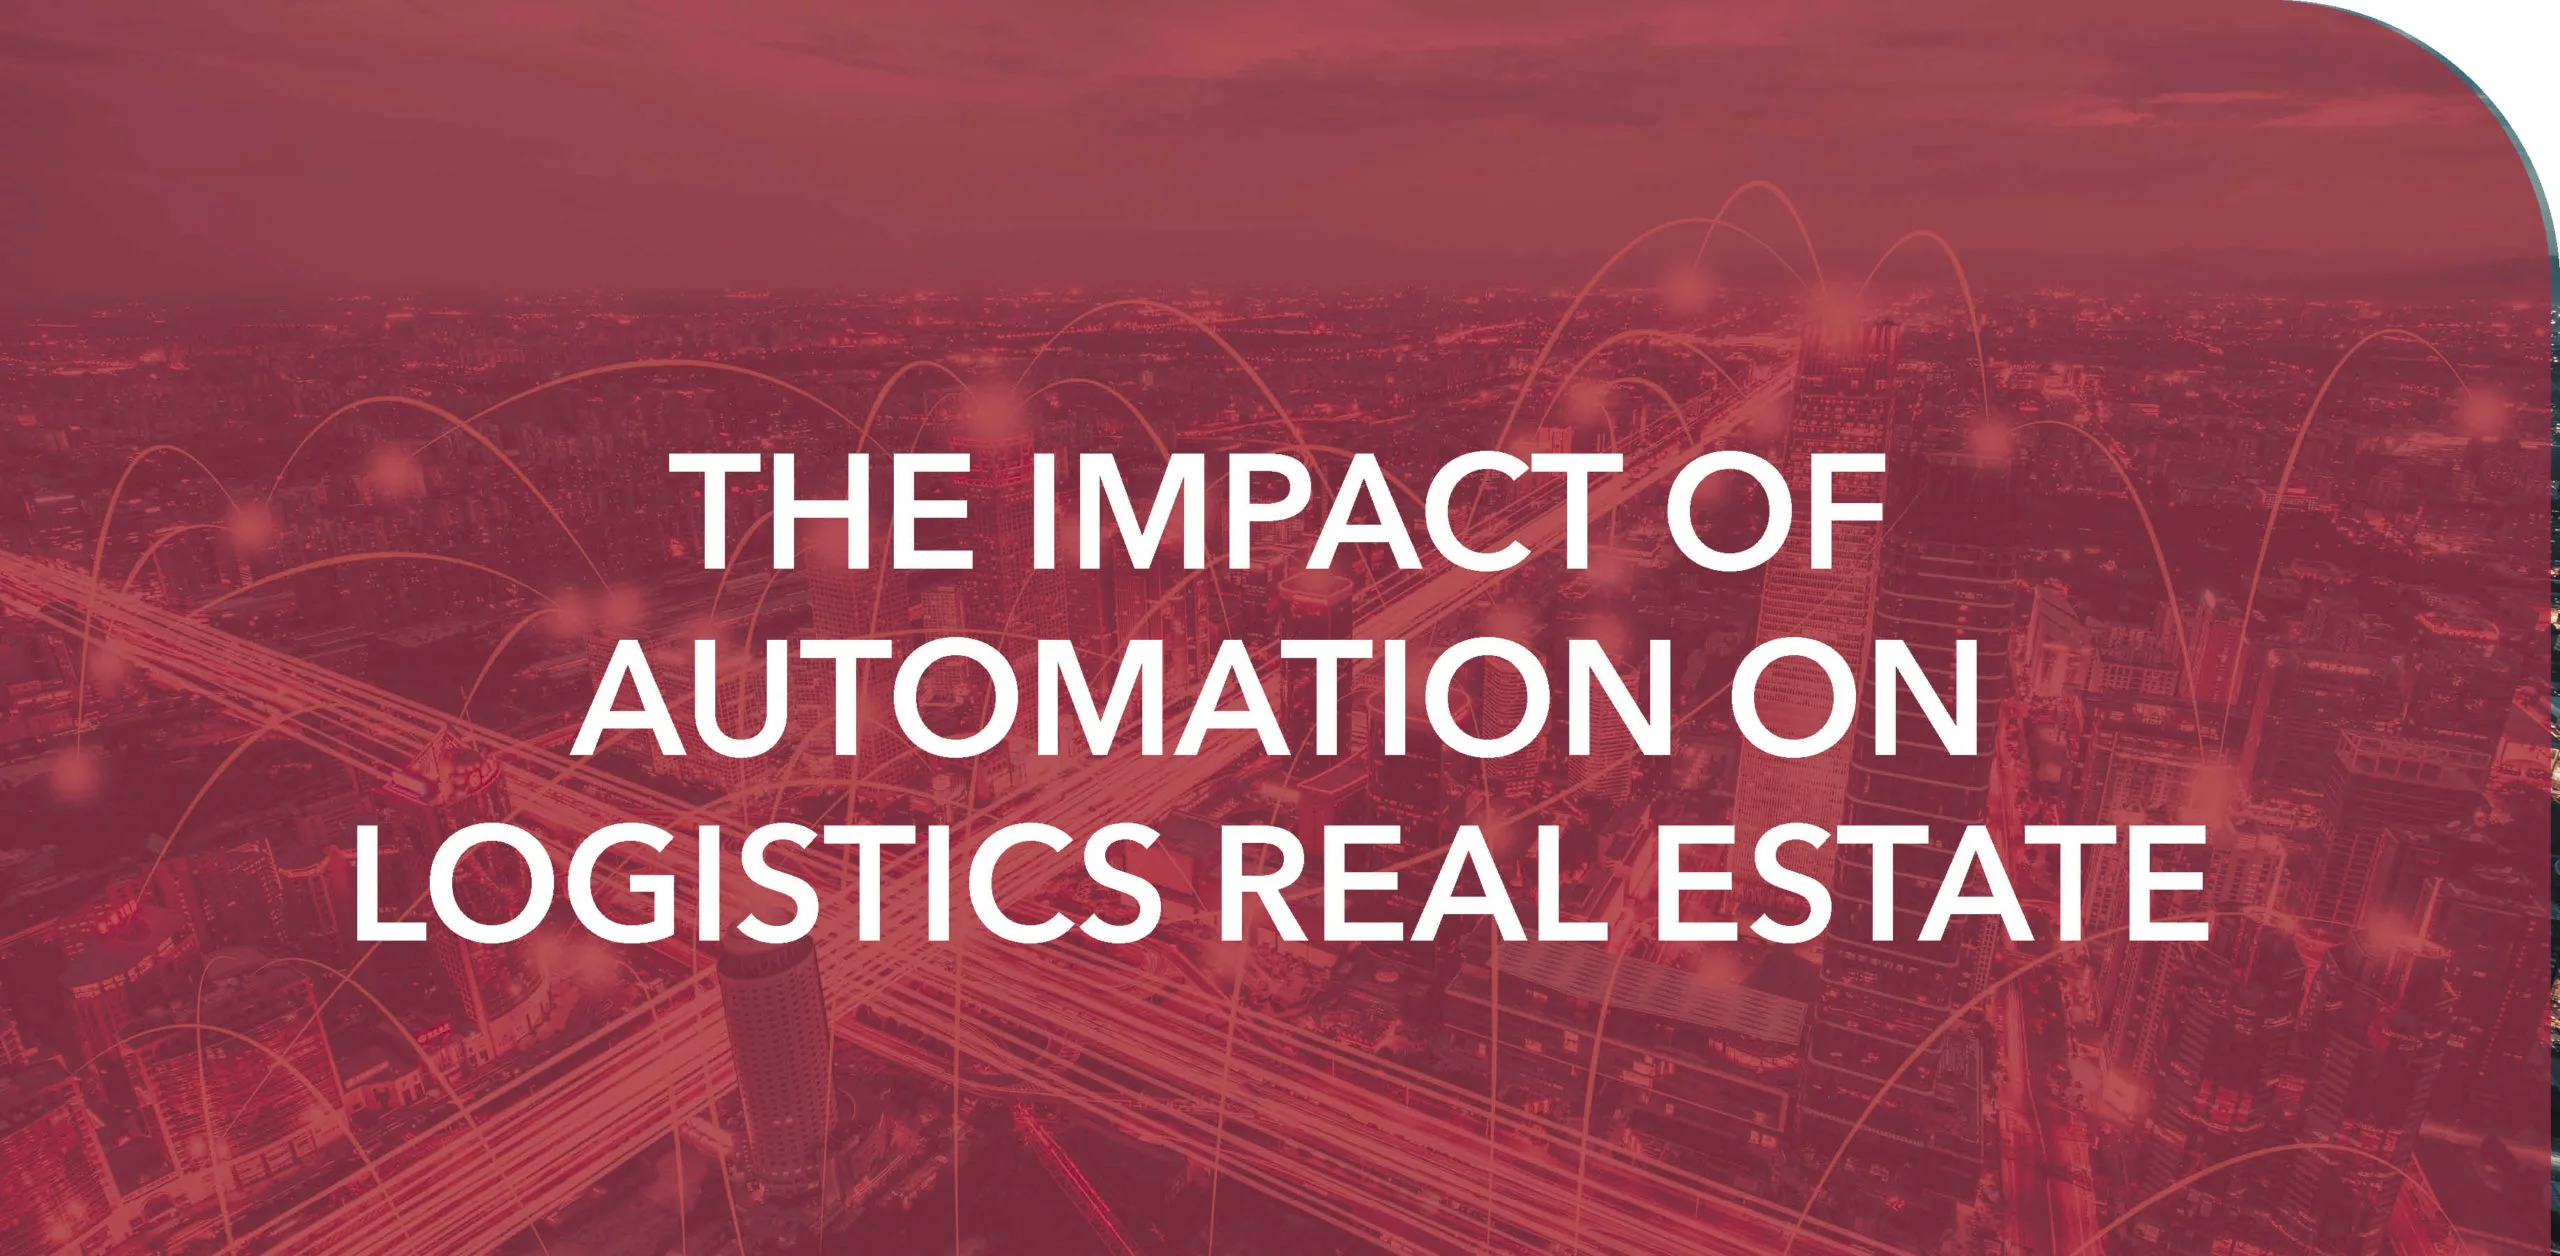 THE IMPACT OF AUTOMATION ON LOGISTICS REAL ESTATE